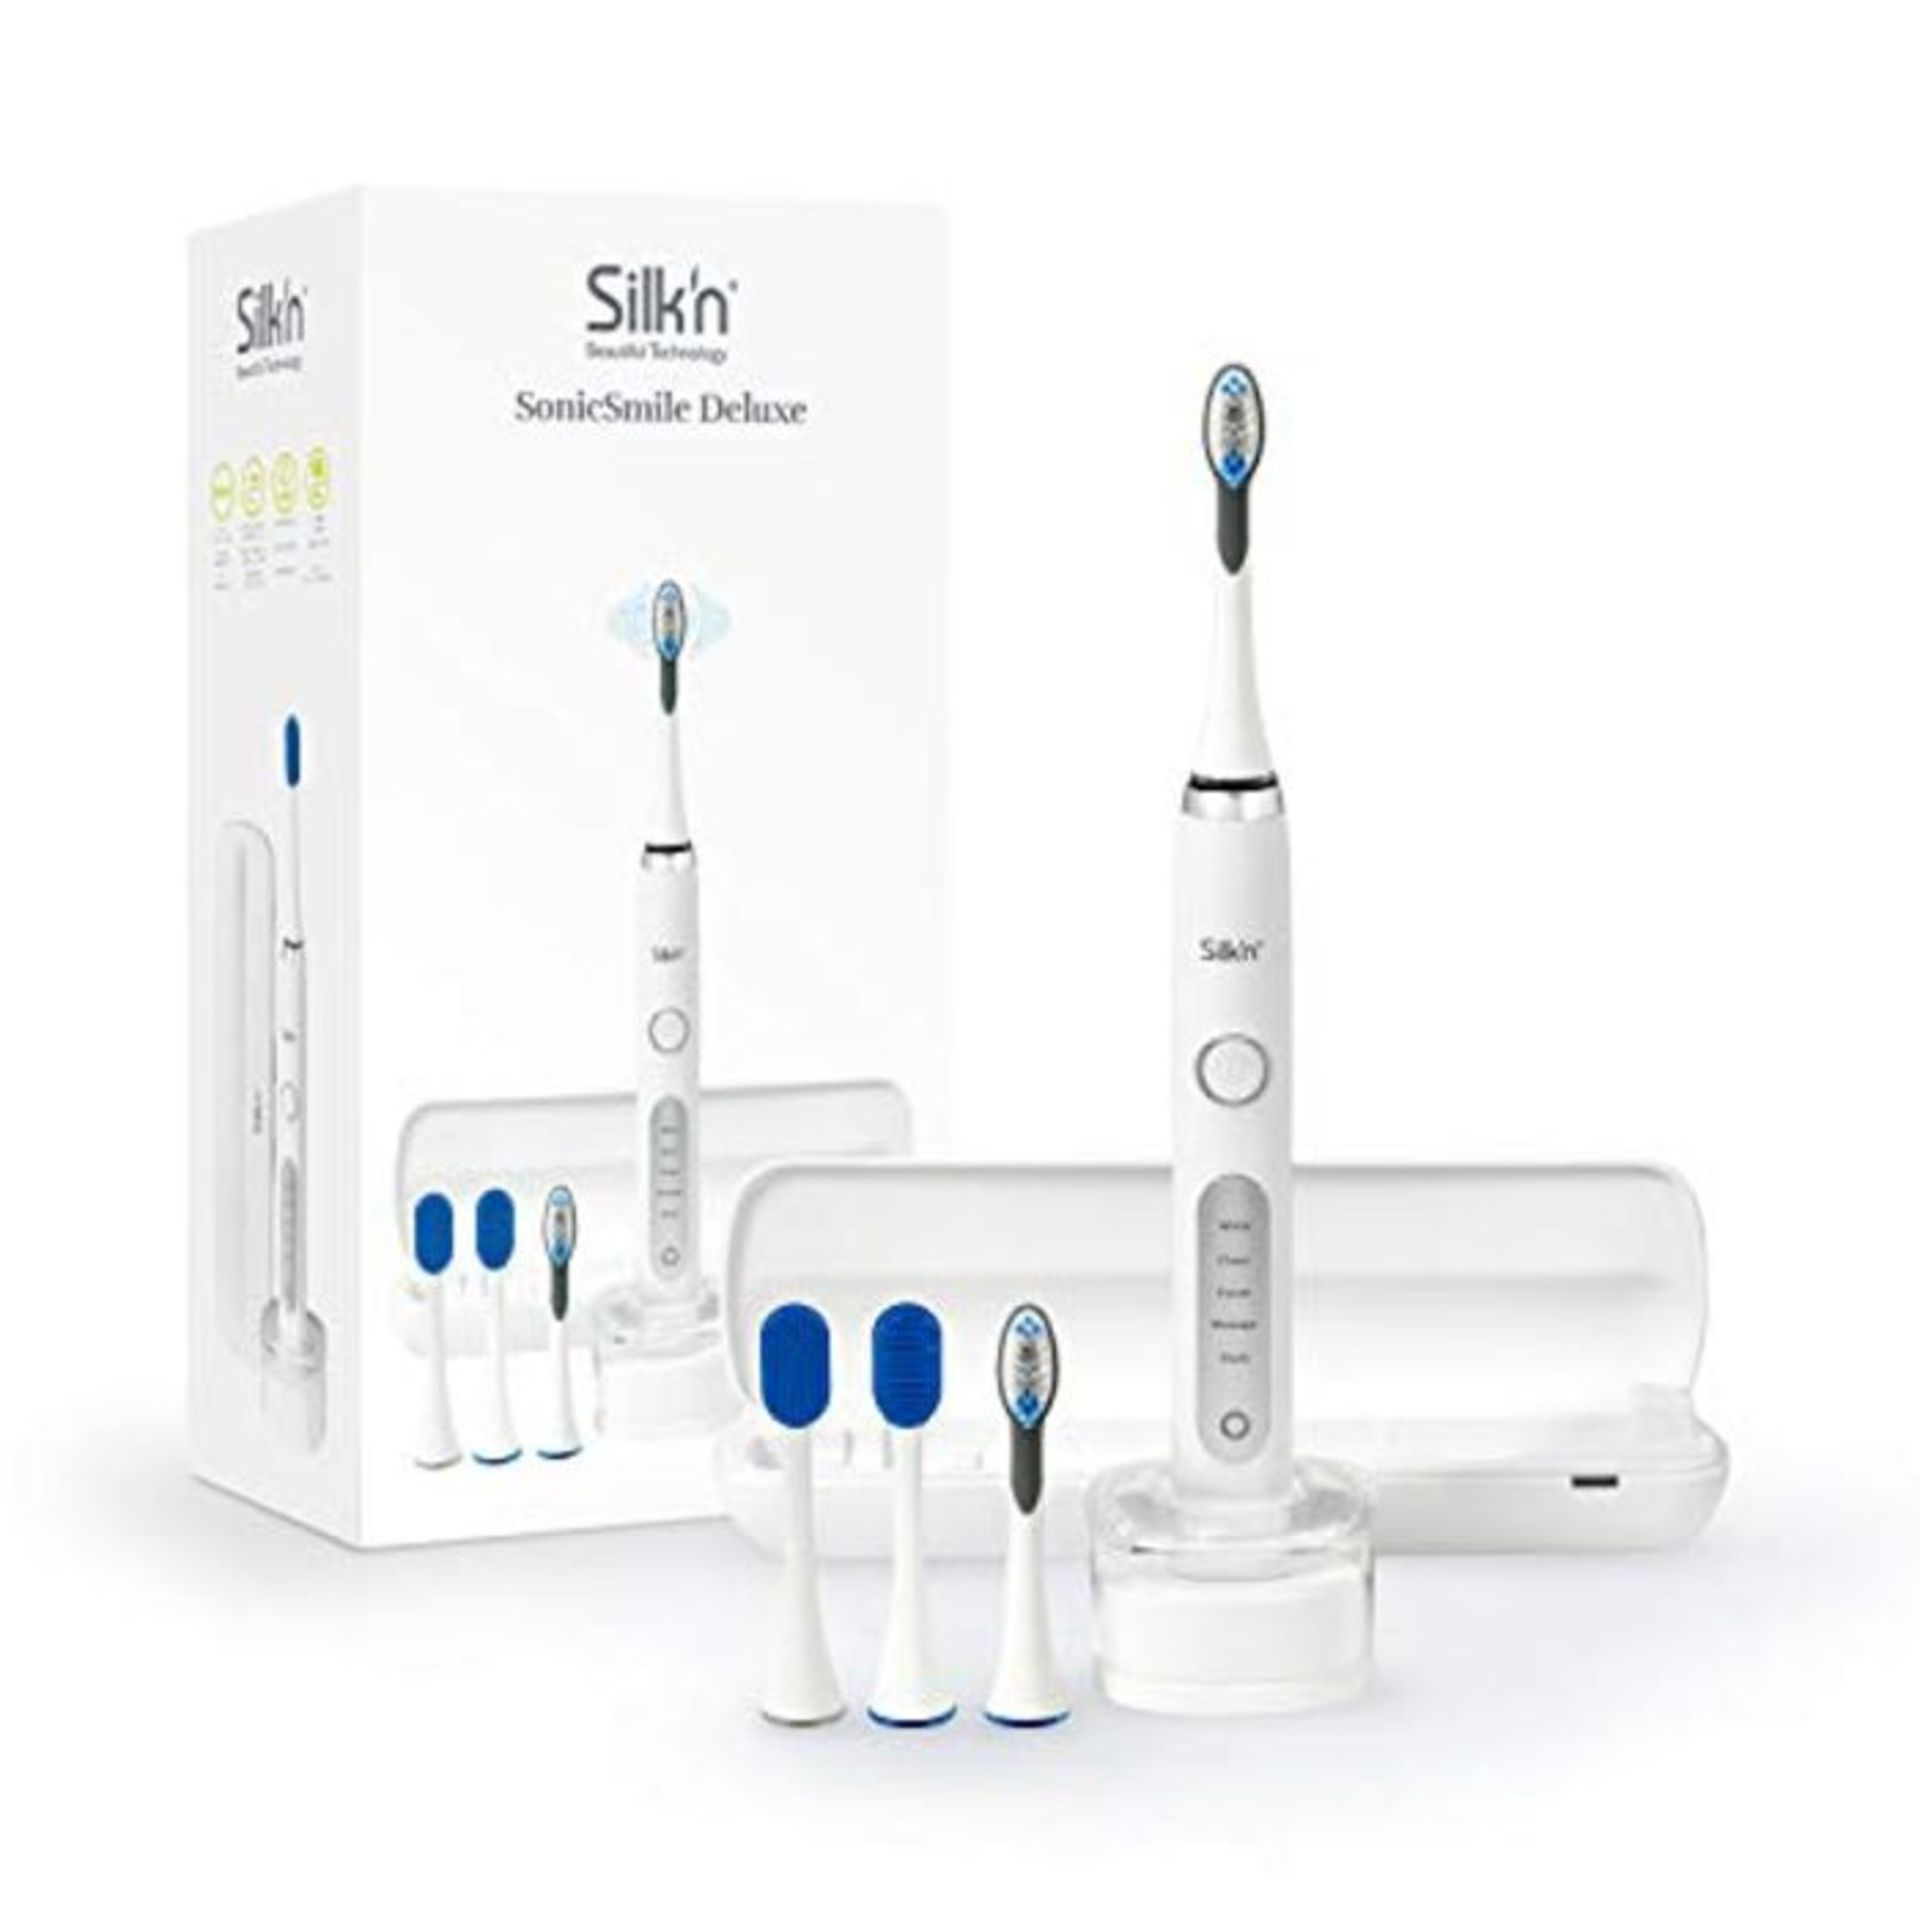 Silk'n SonicSmile Deluxe - Electric Toothbrush for Cleaner, Whiter Teeth 31.000 P.M. -